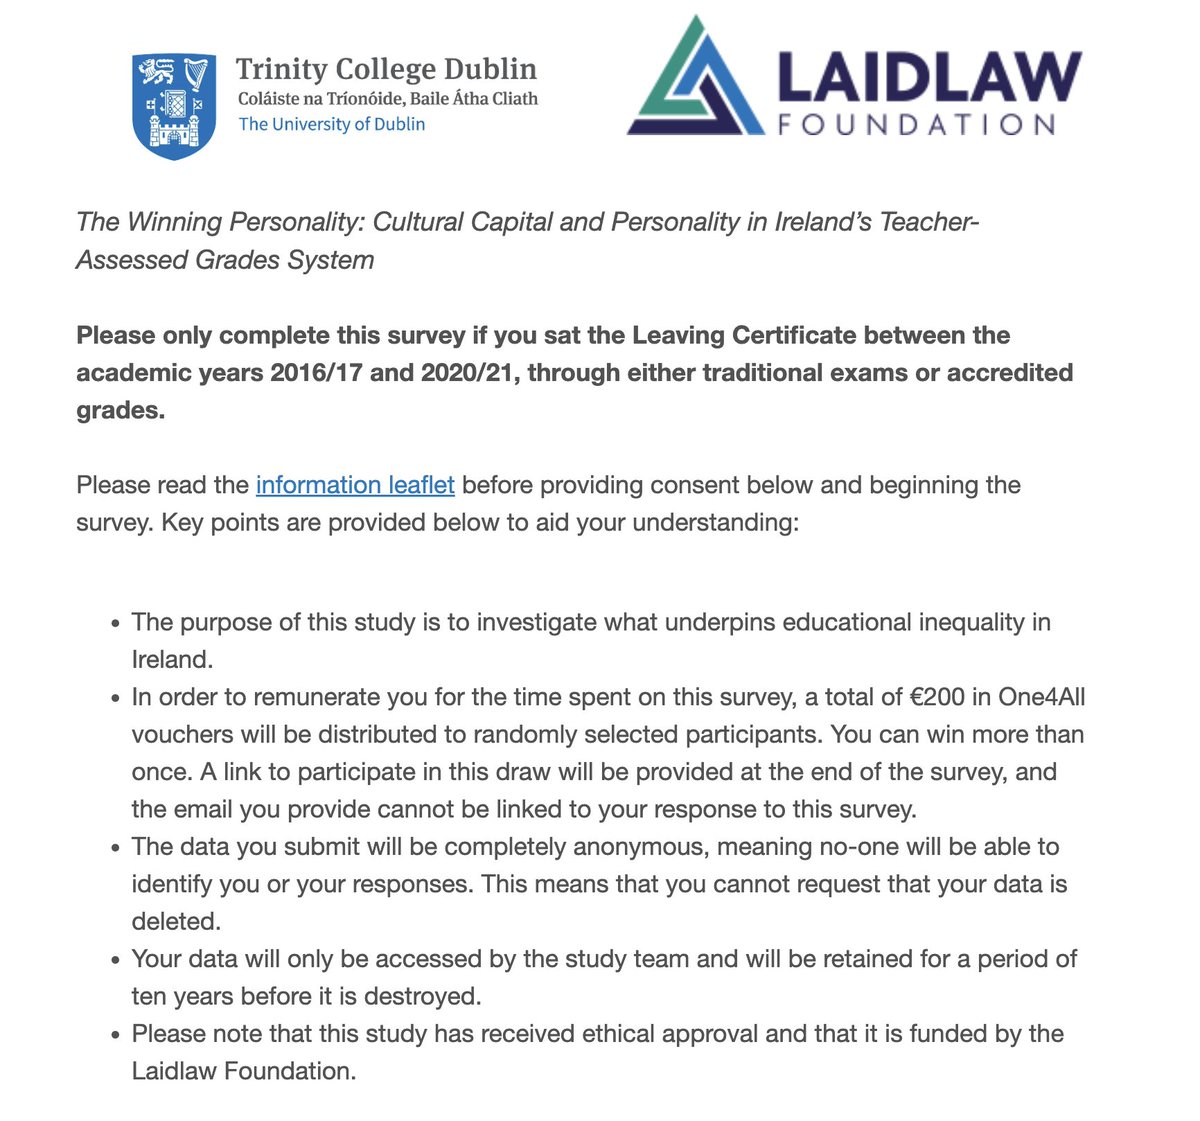 Did you sit the #LeavingCertificate between the academic years 2016/17 and 2020/21? 

Help us find out about inequalities in the Irish education system and take part in a prize draw to win 1 of 8 €25 One4All vouchers. 

Take this 5-min survey: tcdecon.qualtrics.com/jfe/form/SV_bd…

#edchatie